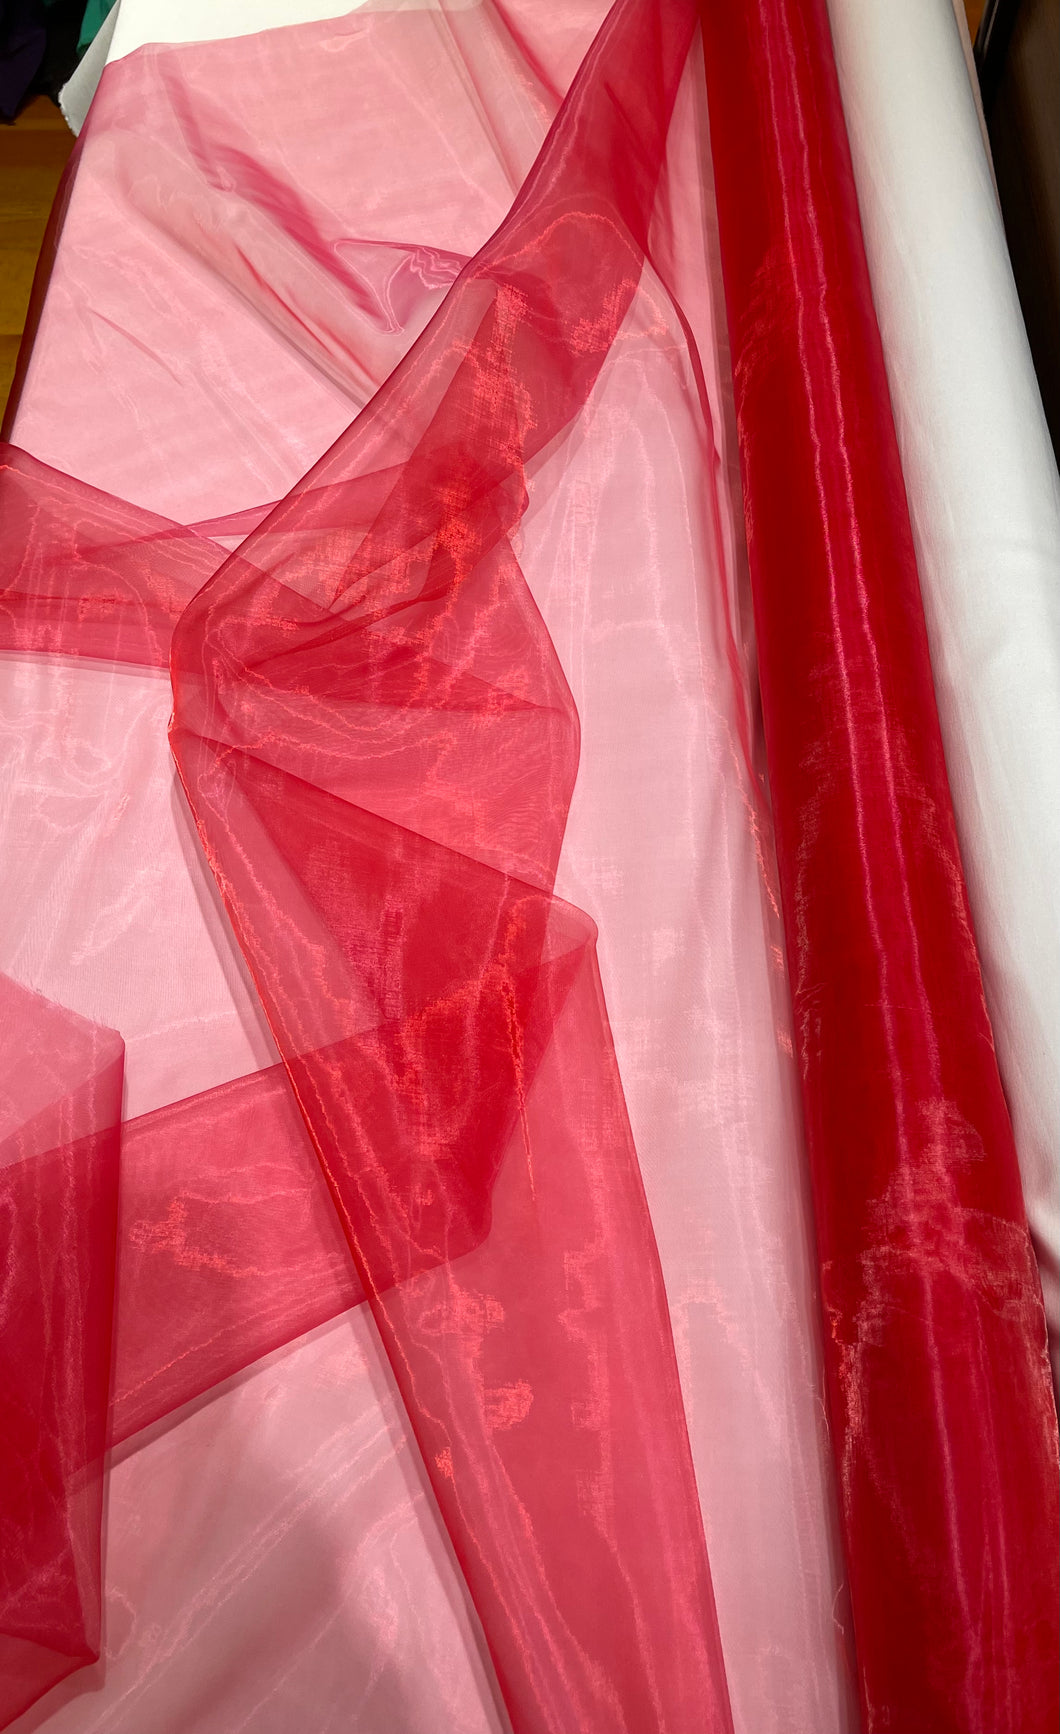 Poly Organza Red - 1/2 meter